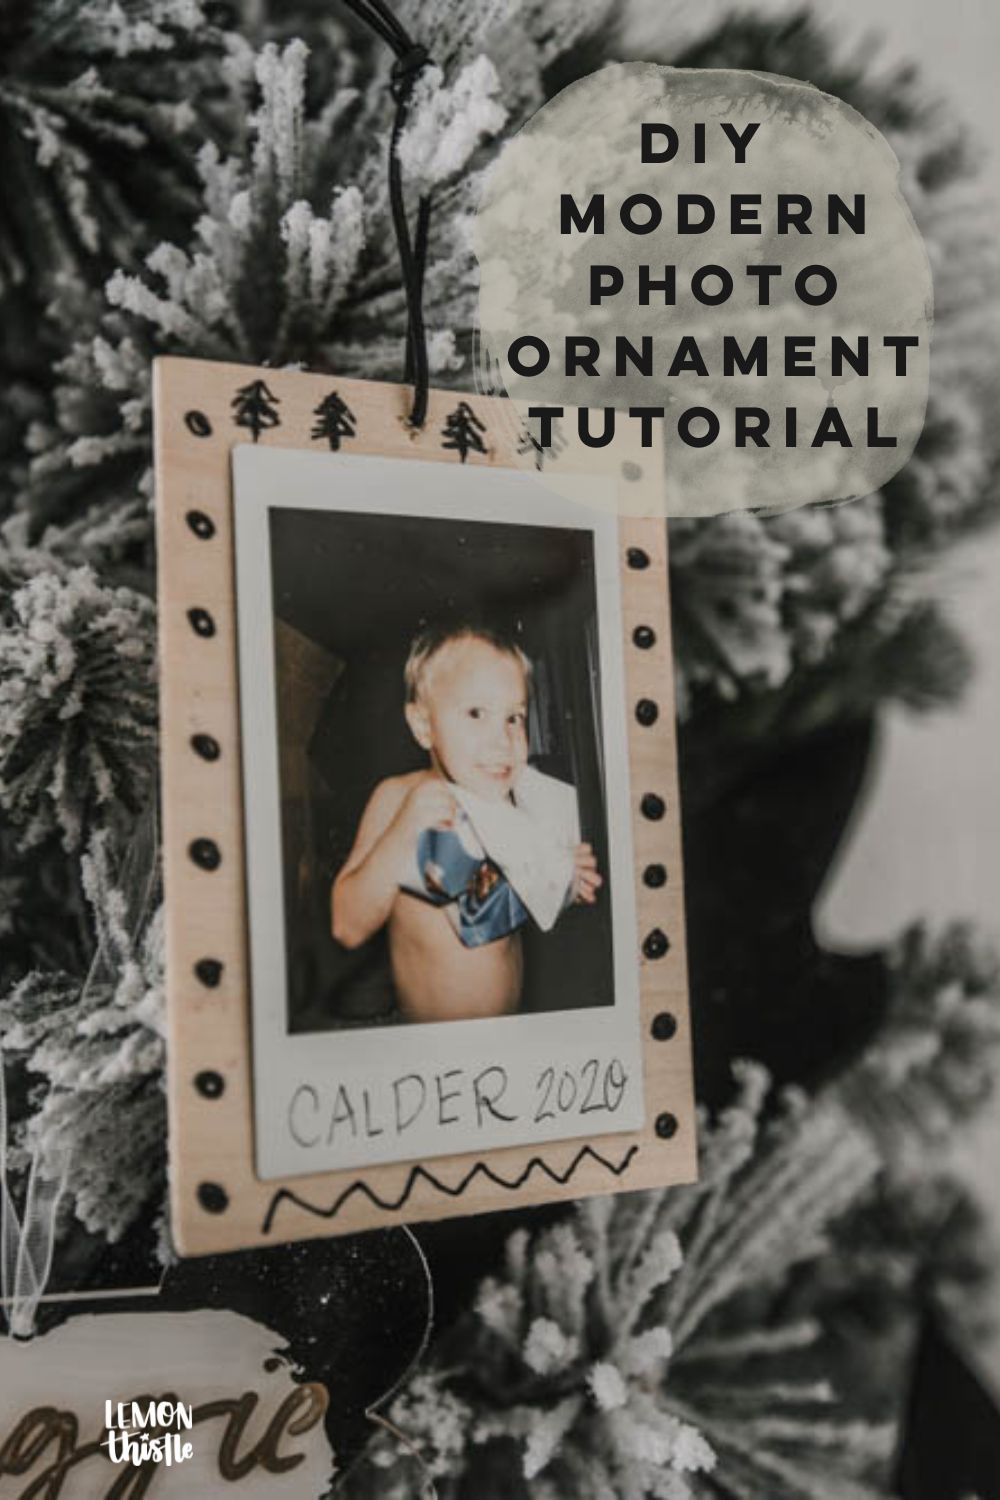 Photo of instax photo ornament with text overlay - DIY Photo Ornament Tutorial